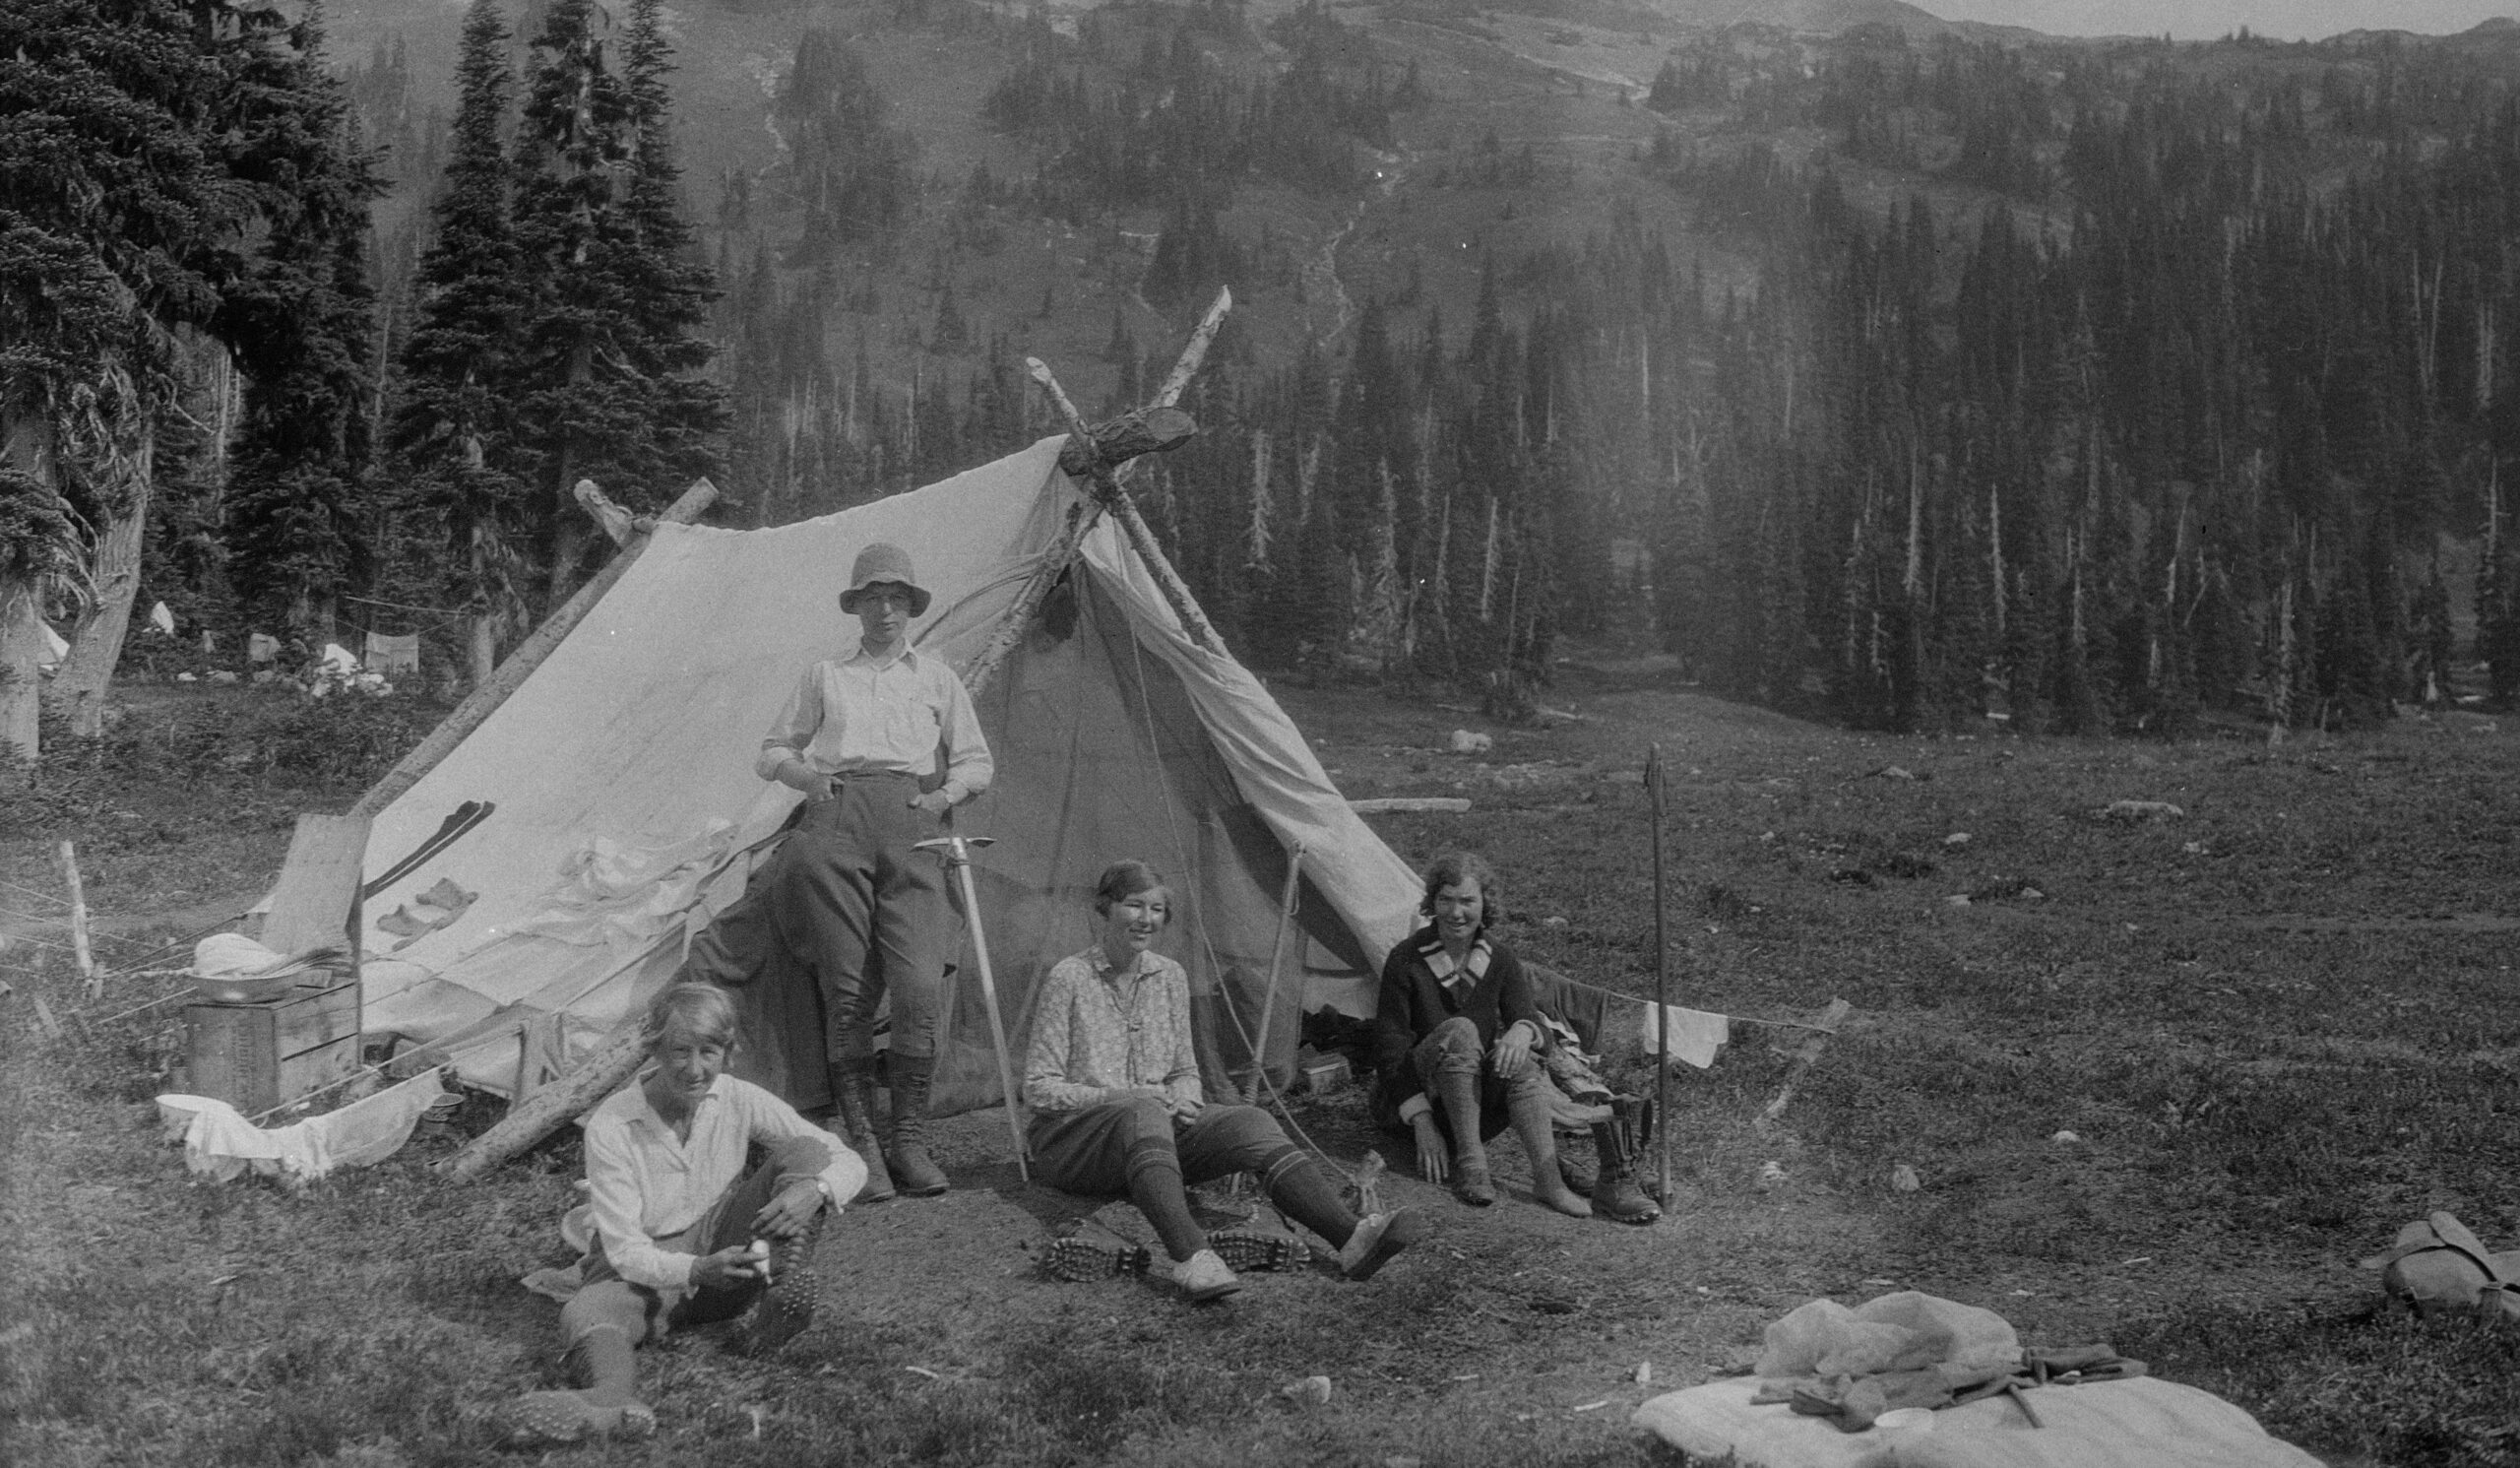 Group of women in front of a tent at the Garibaldi camp, between 1927 and 1931.Reference code: AM484-S10-: 2005-040.522